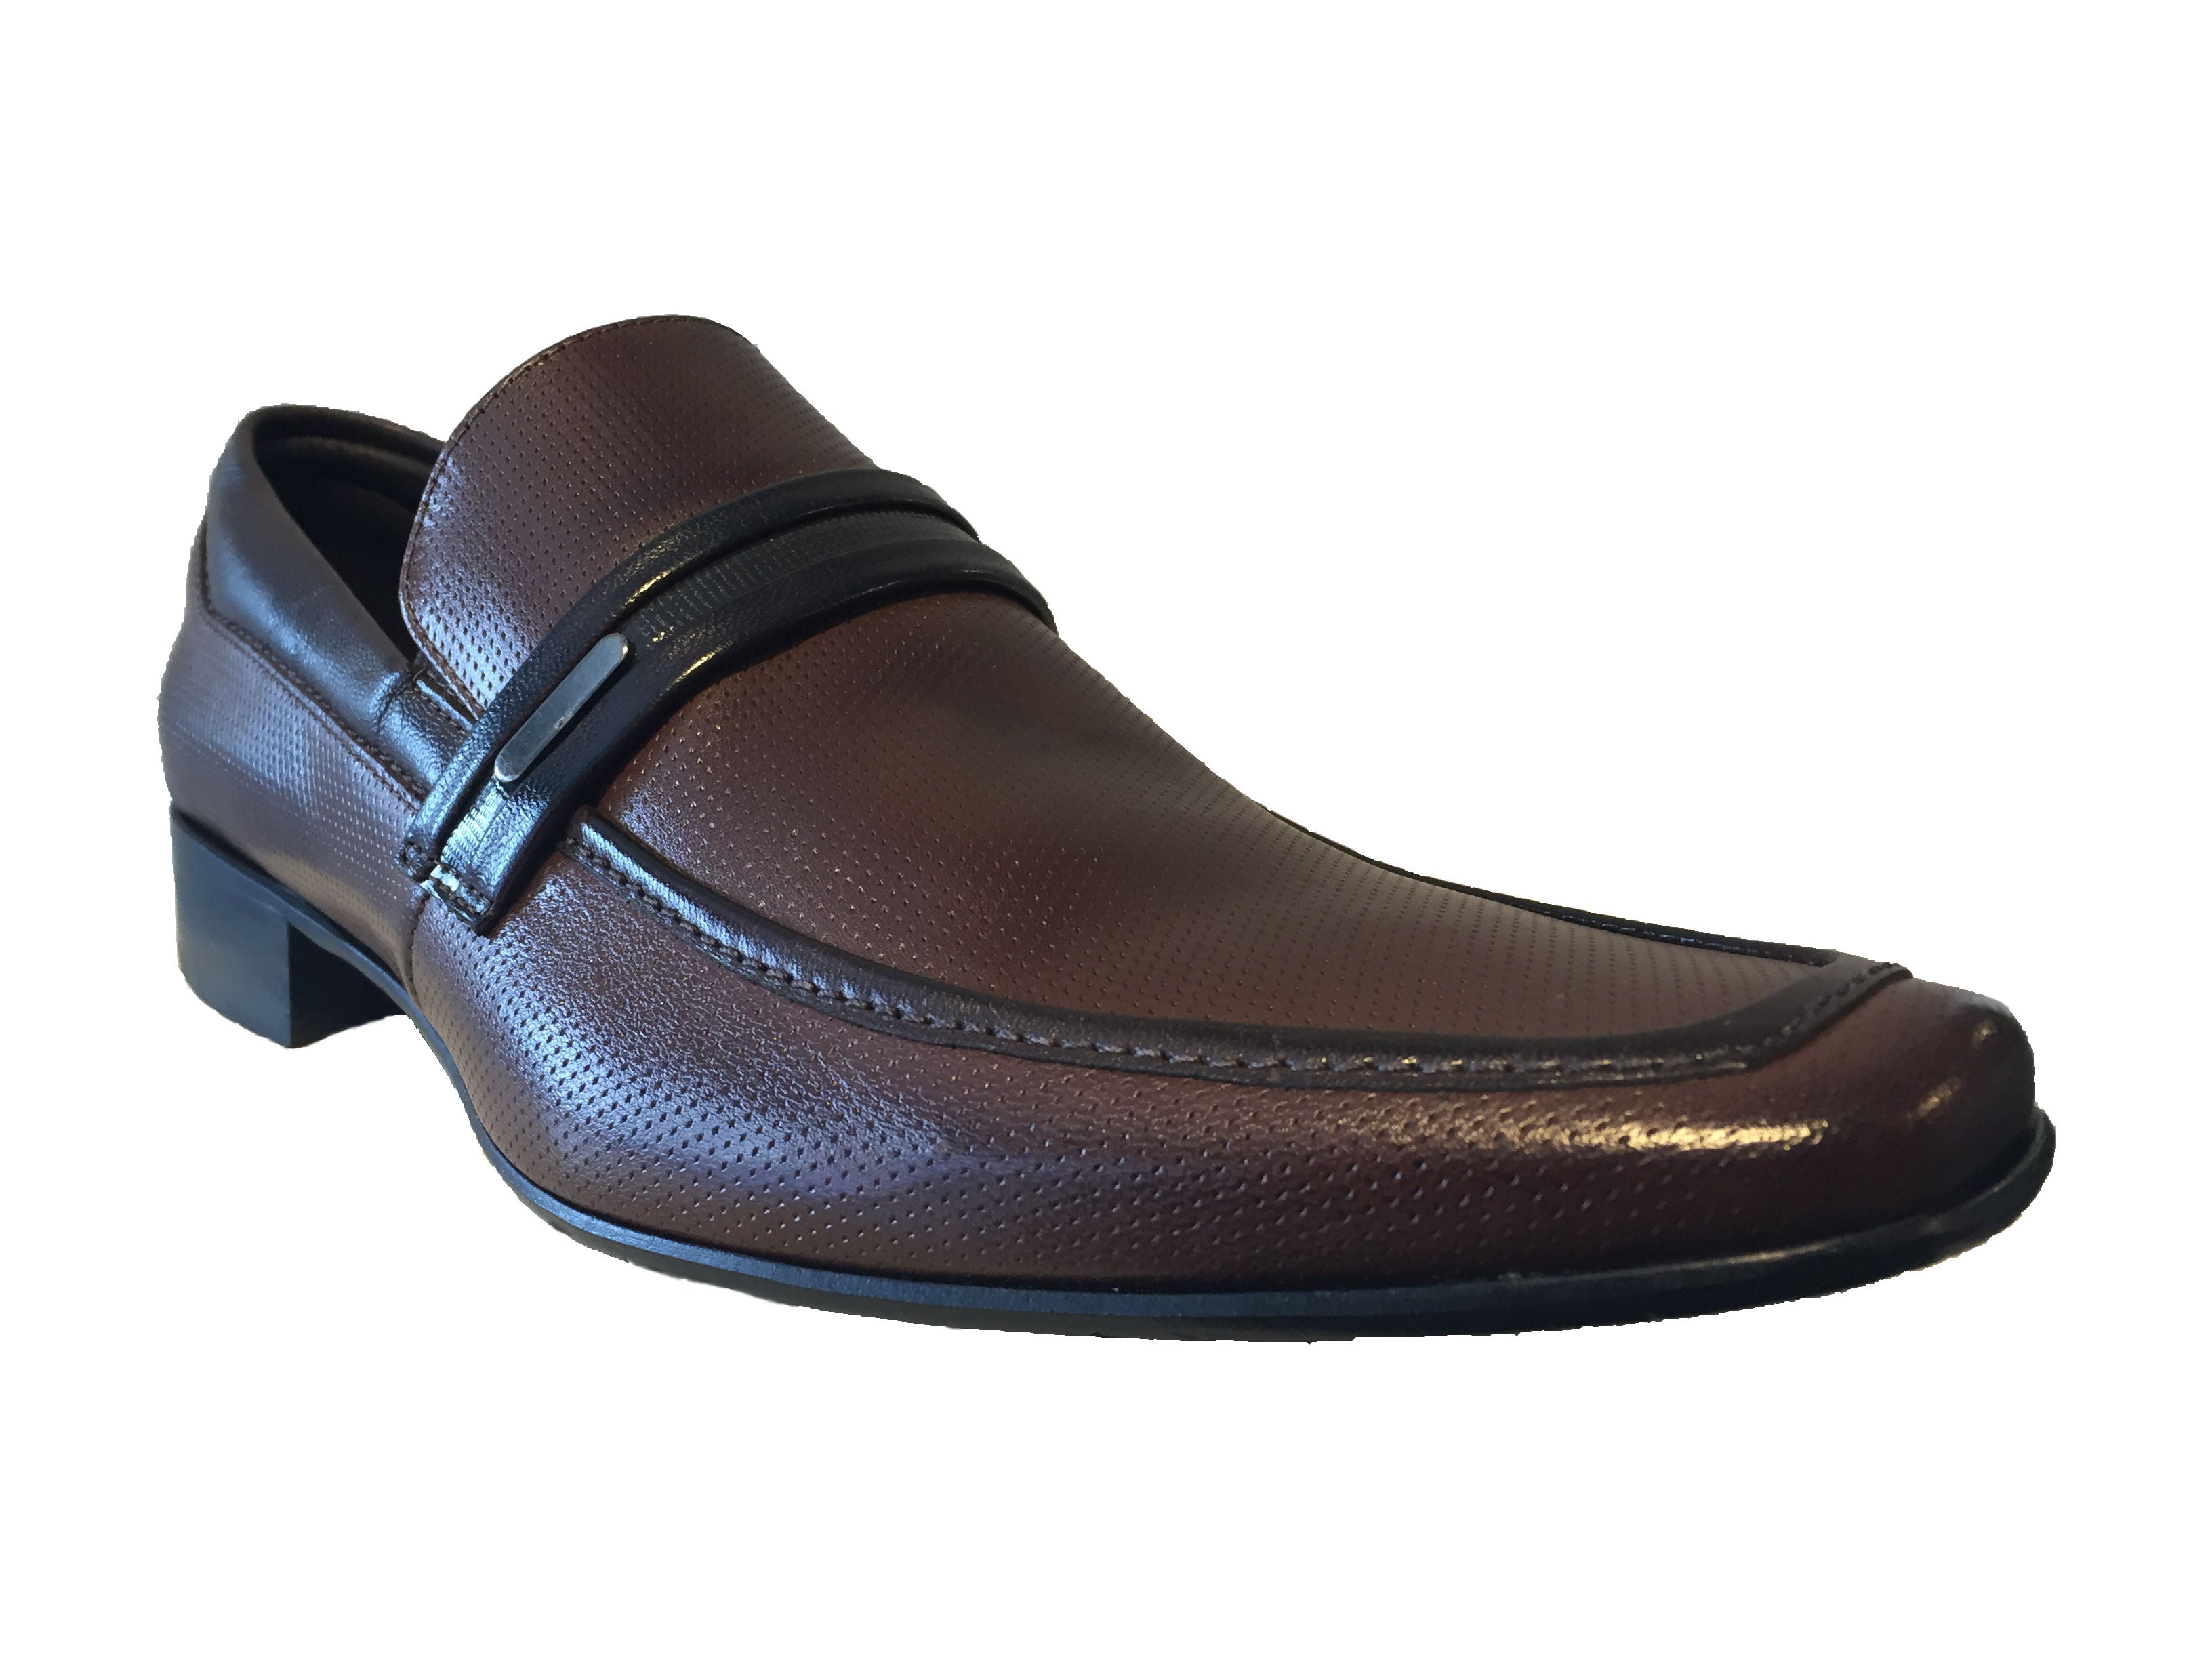 Anatomic Maceio Brown Leather Slip on Shoes - elevate your sole